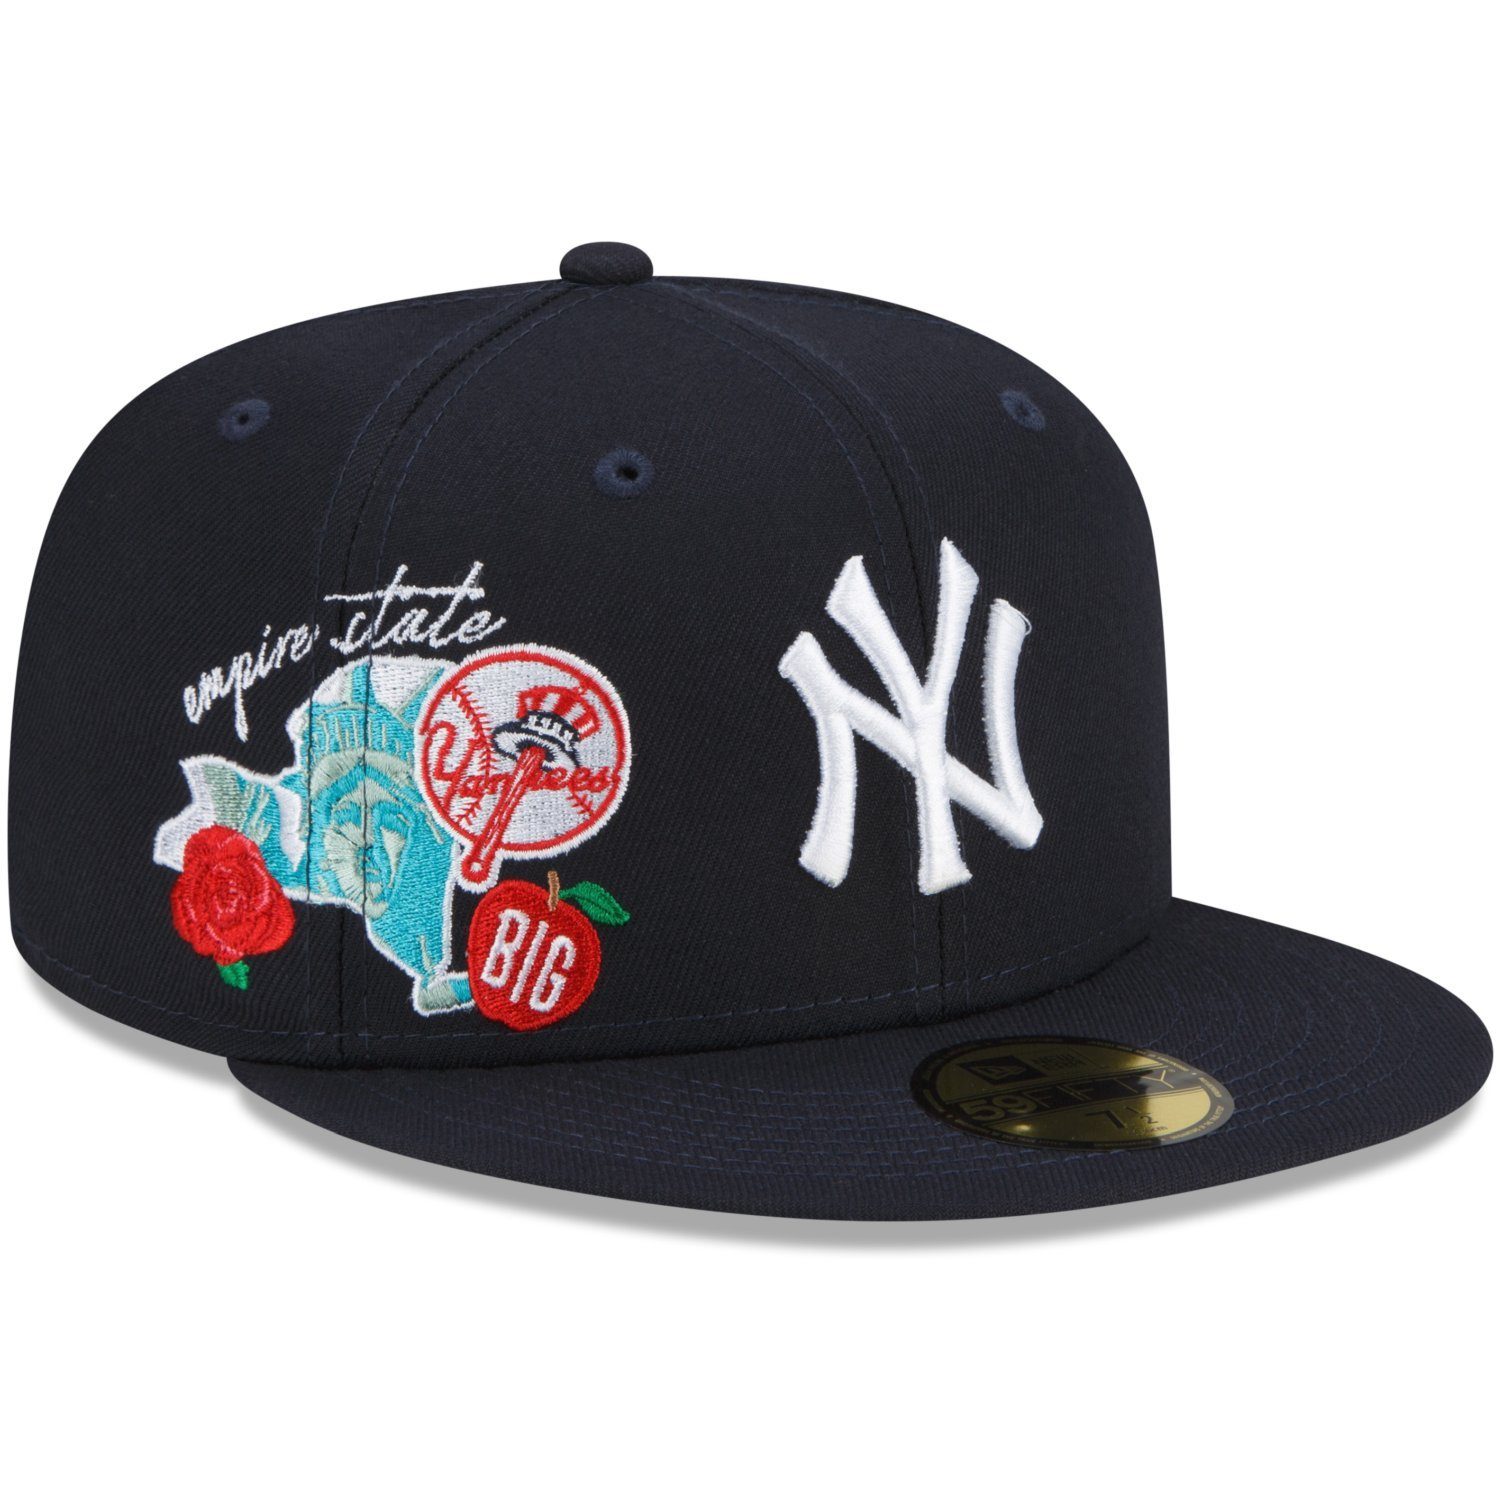 York CITY New CLUSTER Yankees 59Fifty New Fitted Cap Era